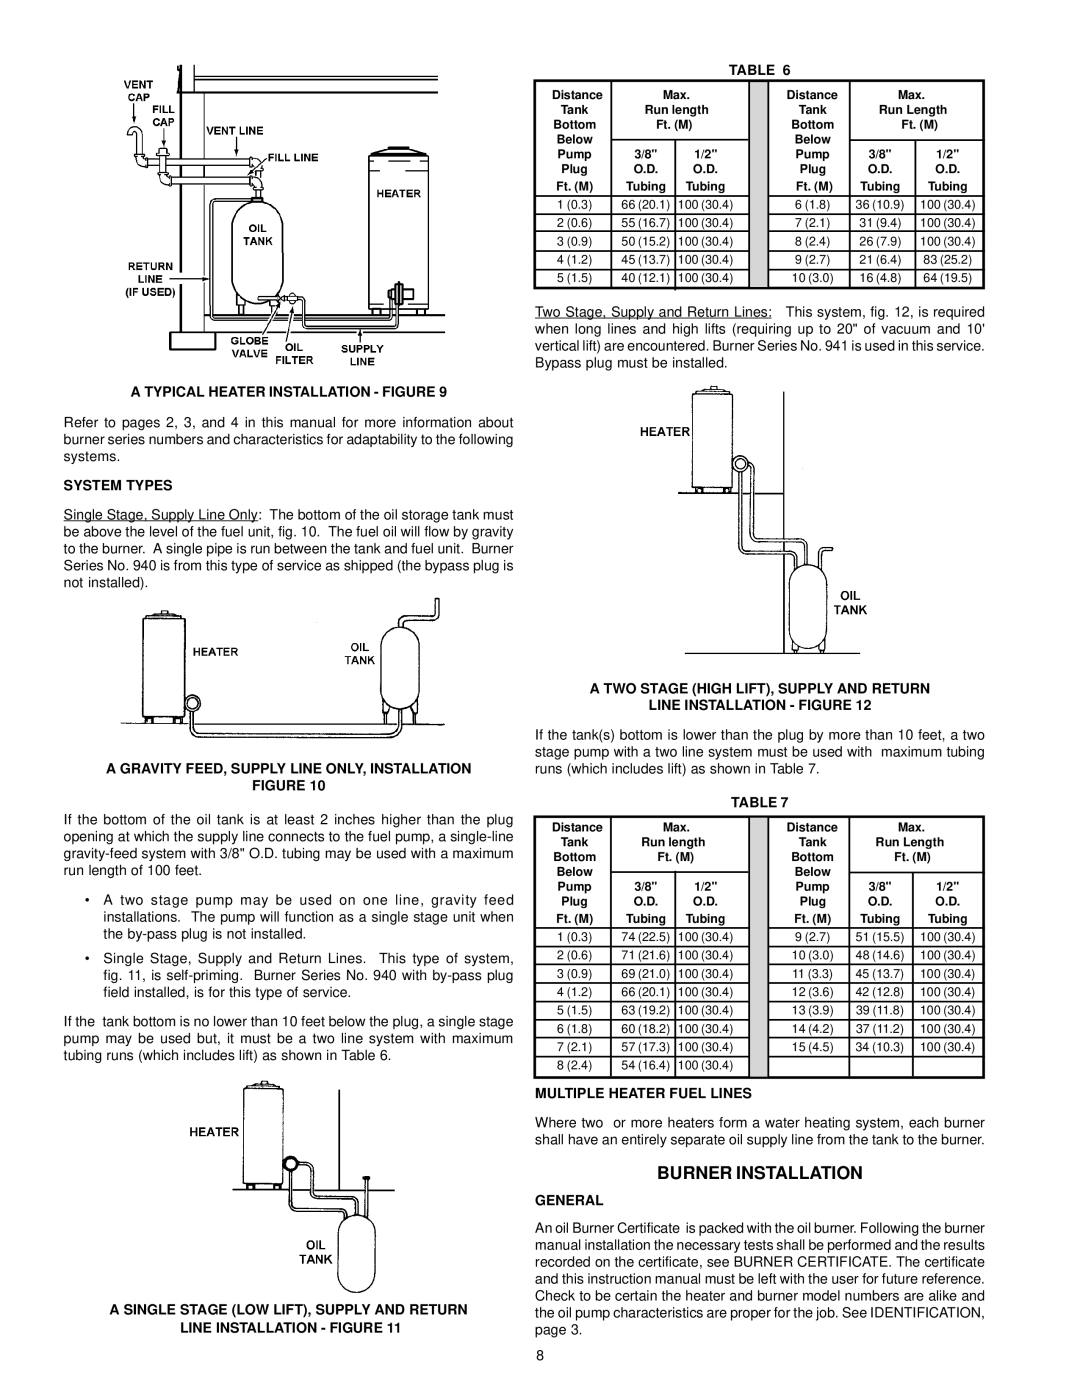 State Industries GPO 86-199 manual Burner Installation, Typical Heater Installation Figure, System Types 